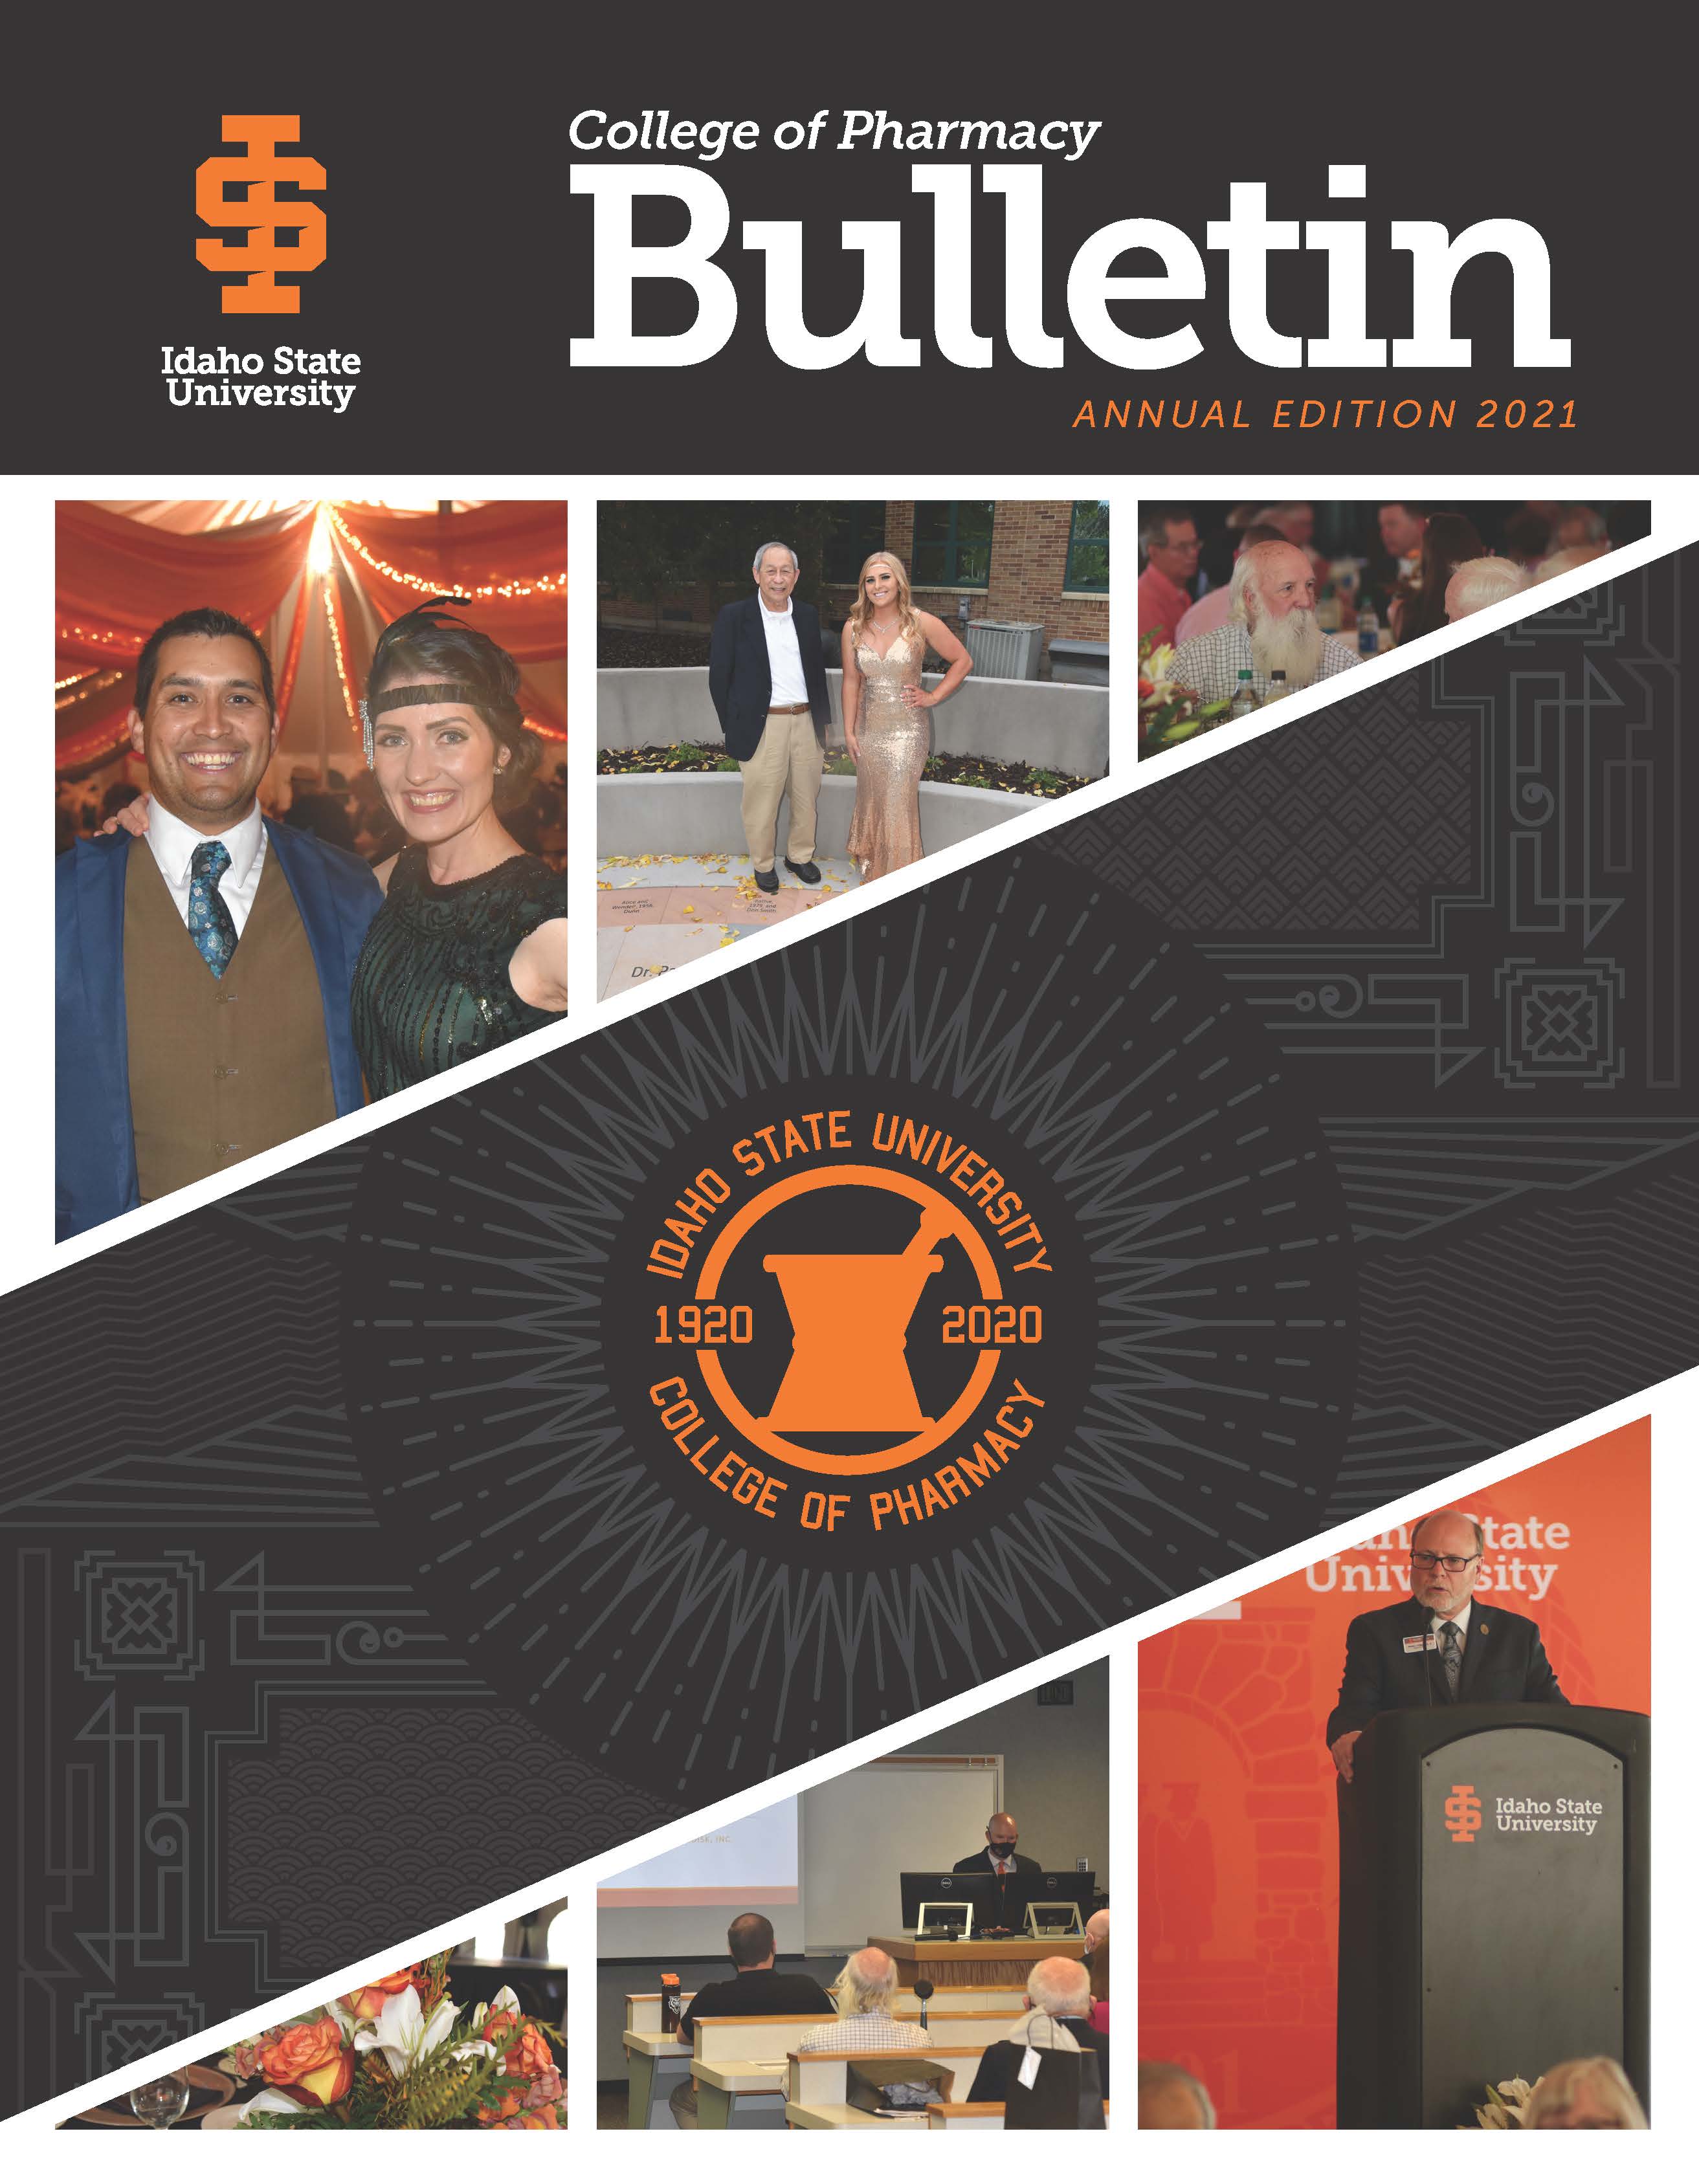 Idaho State University College of Pharmacy Bulletin Annual Edition 2021